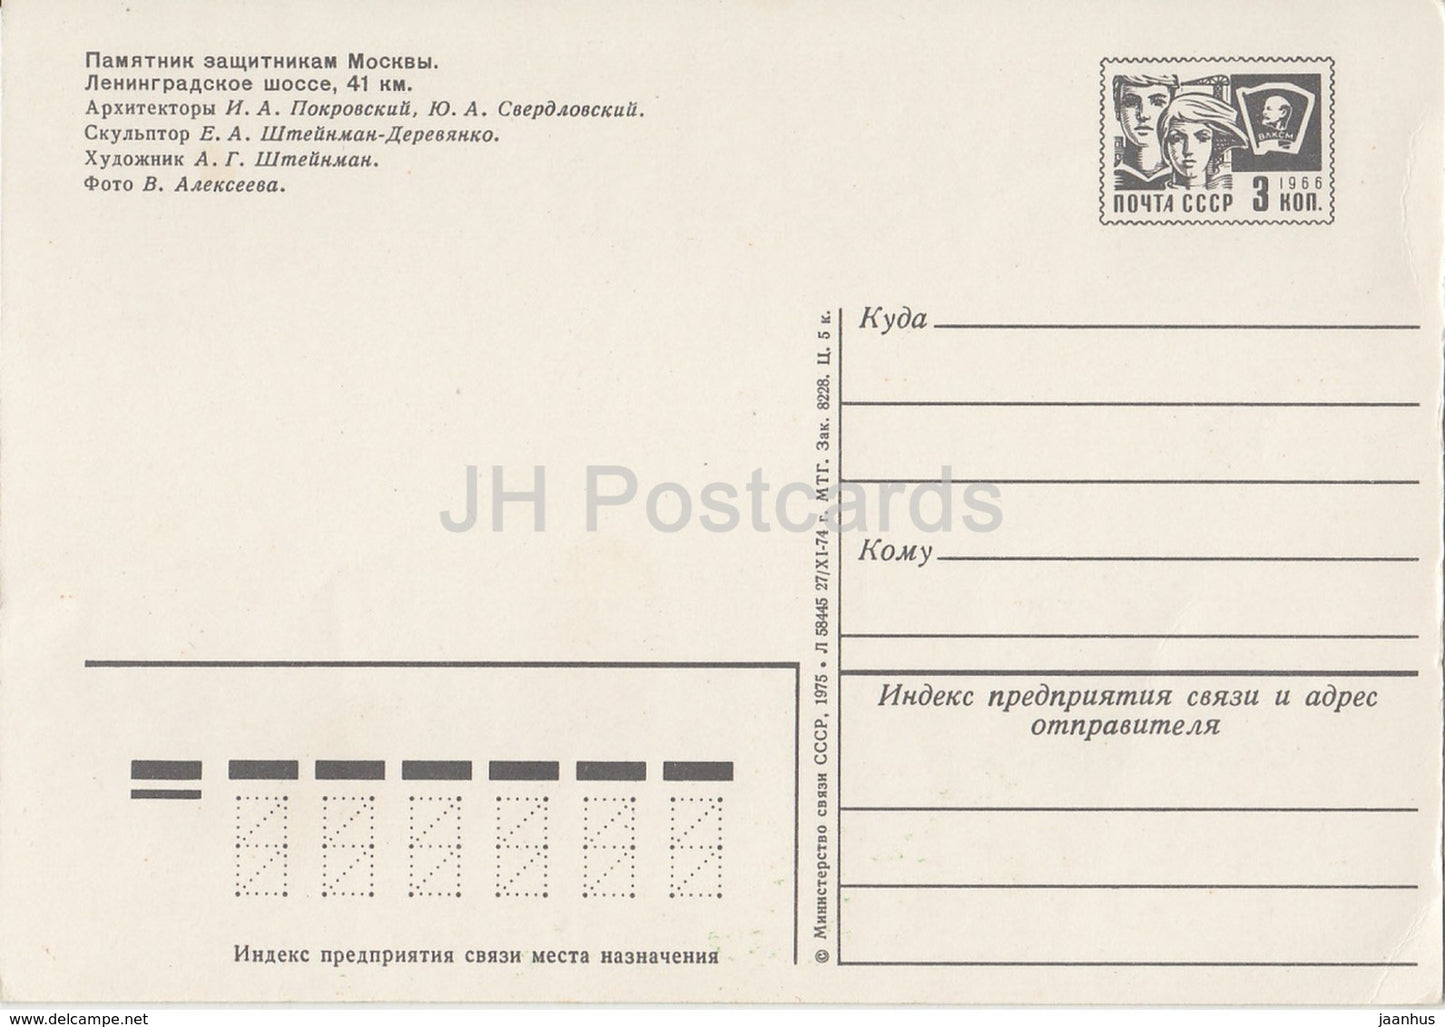 monument to the defenders of Moscow - Leningrad highway 41 km - postal stationery - 1975 - Russia USSR - unused